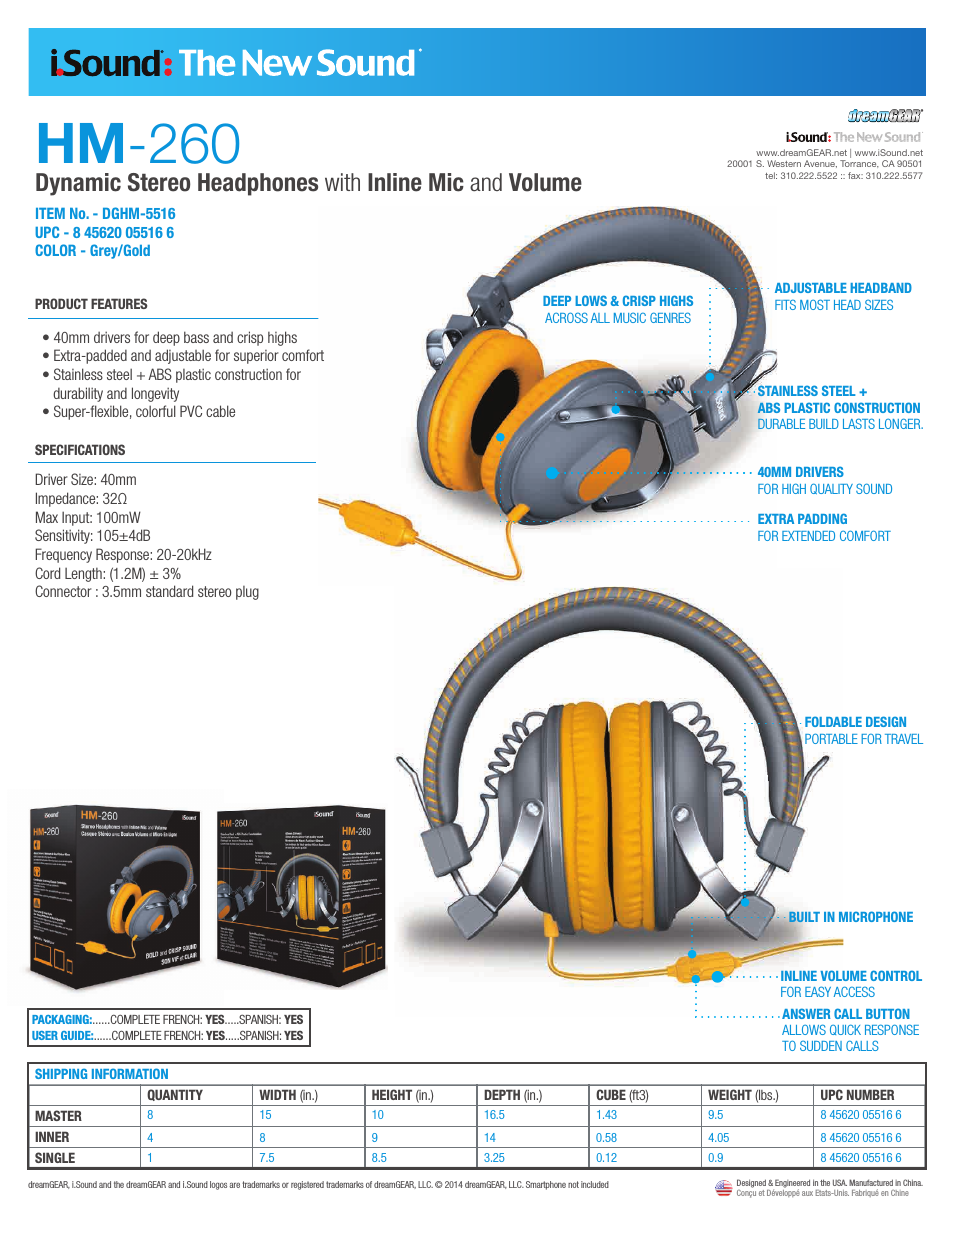 HM-260 Headphones with Microphone - Sell Sheet